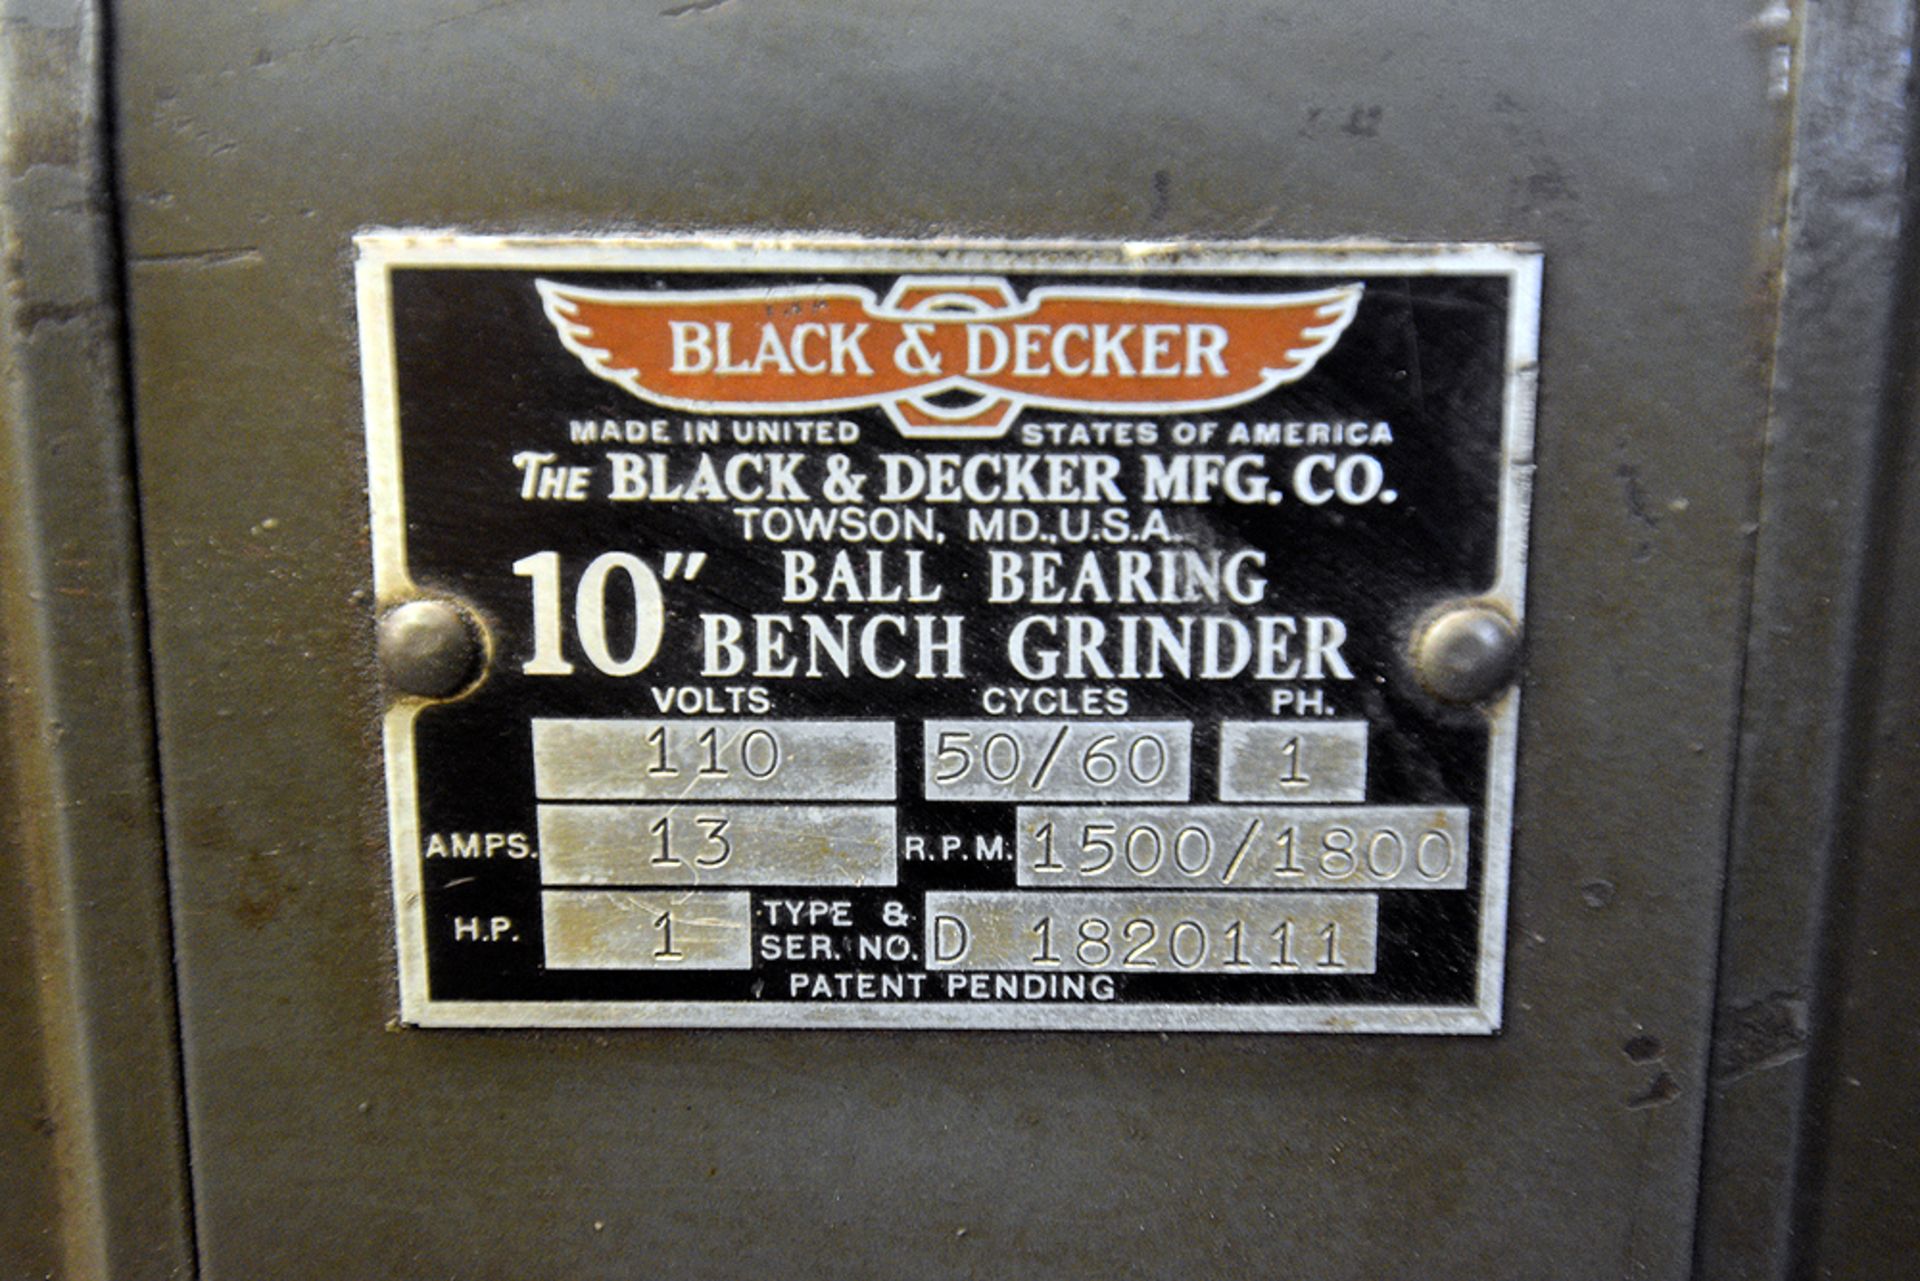 Black and Decker 10" Ball Bearing Bench Grinder, 110v, 1-Phase, 1hp, s/n D1820111 w/ Stand - Image 3 of 3